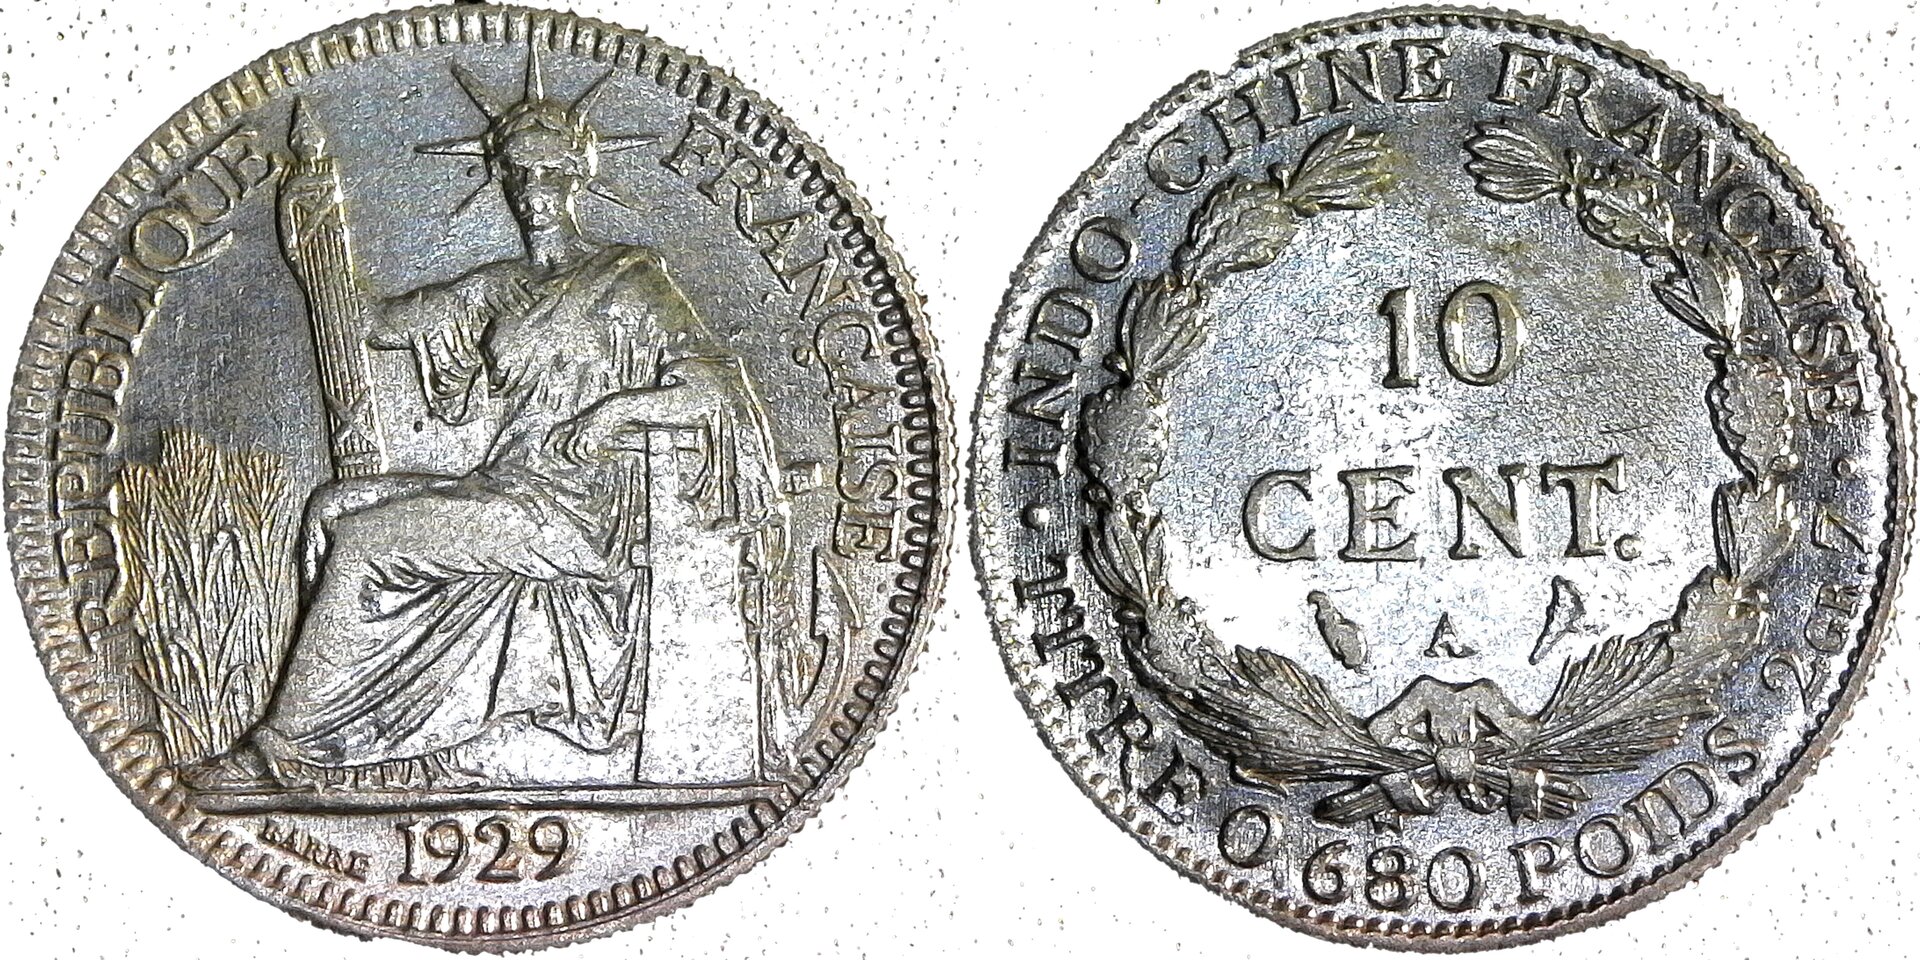 French Indo China 10 centimes 1929 obv B-side-cutout.jpg